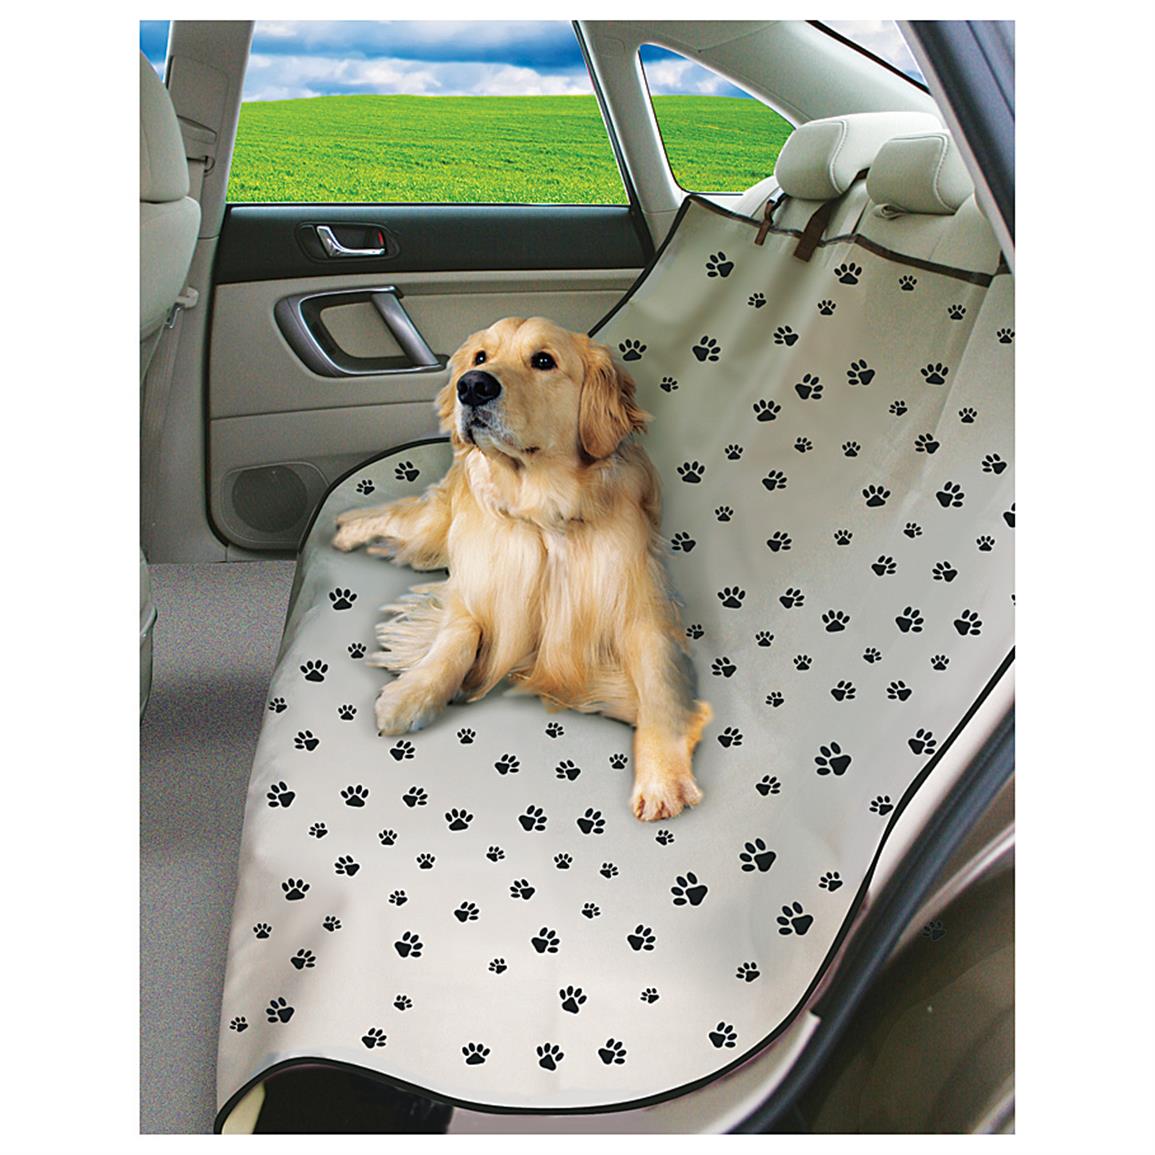 Paw Print Waterproof Car Seat Cover - 622699, Pet Accessories at